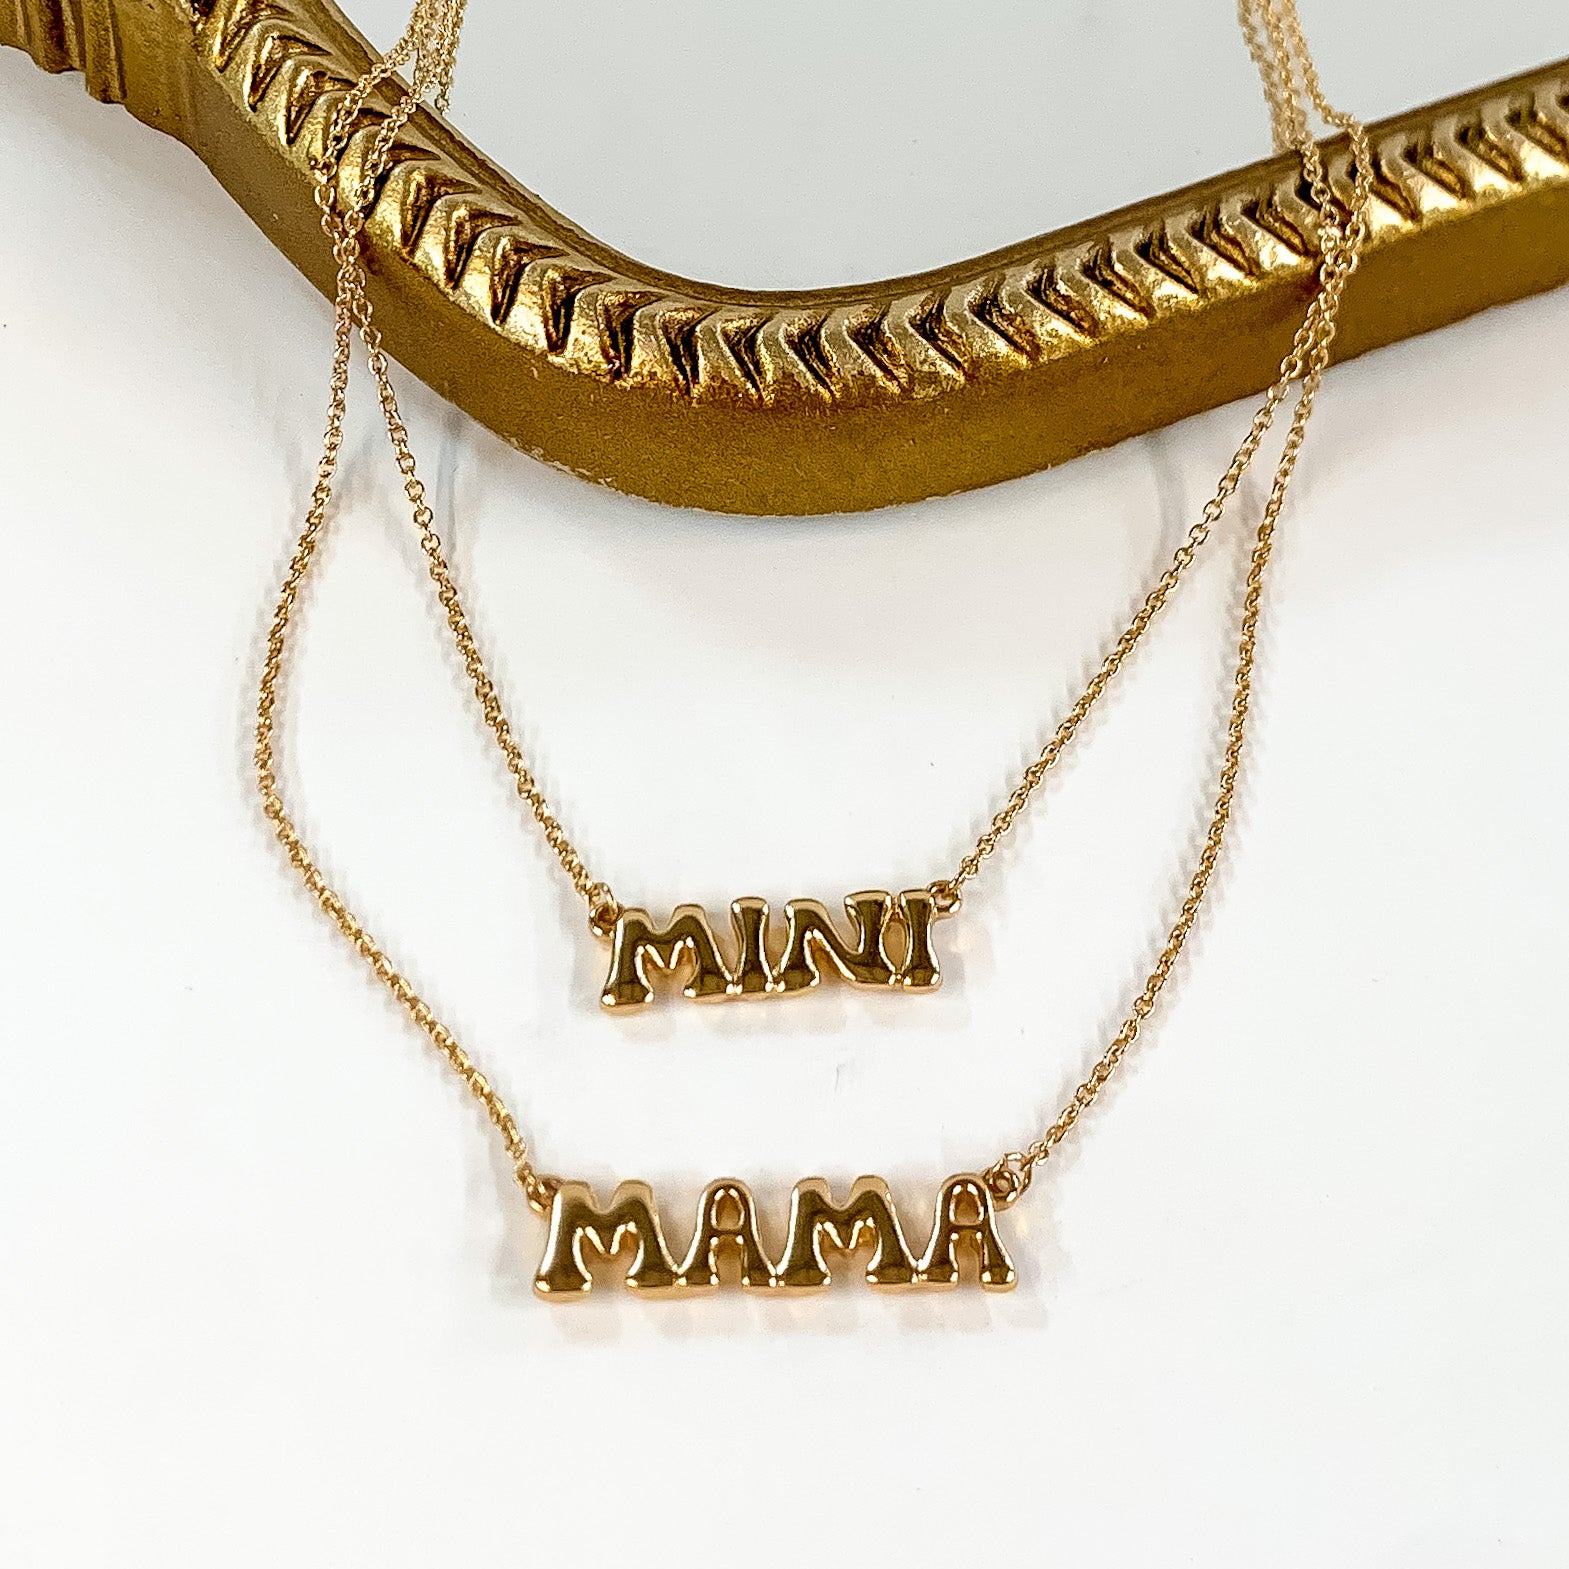 Two gold chain necklaces with word plates. The longer necklace says "MAMA" and the shorter necklace says "MINI." These neckalces are pictured partially laying on a gold mirror on a white background. 